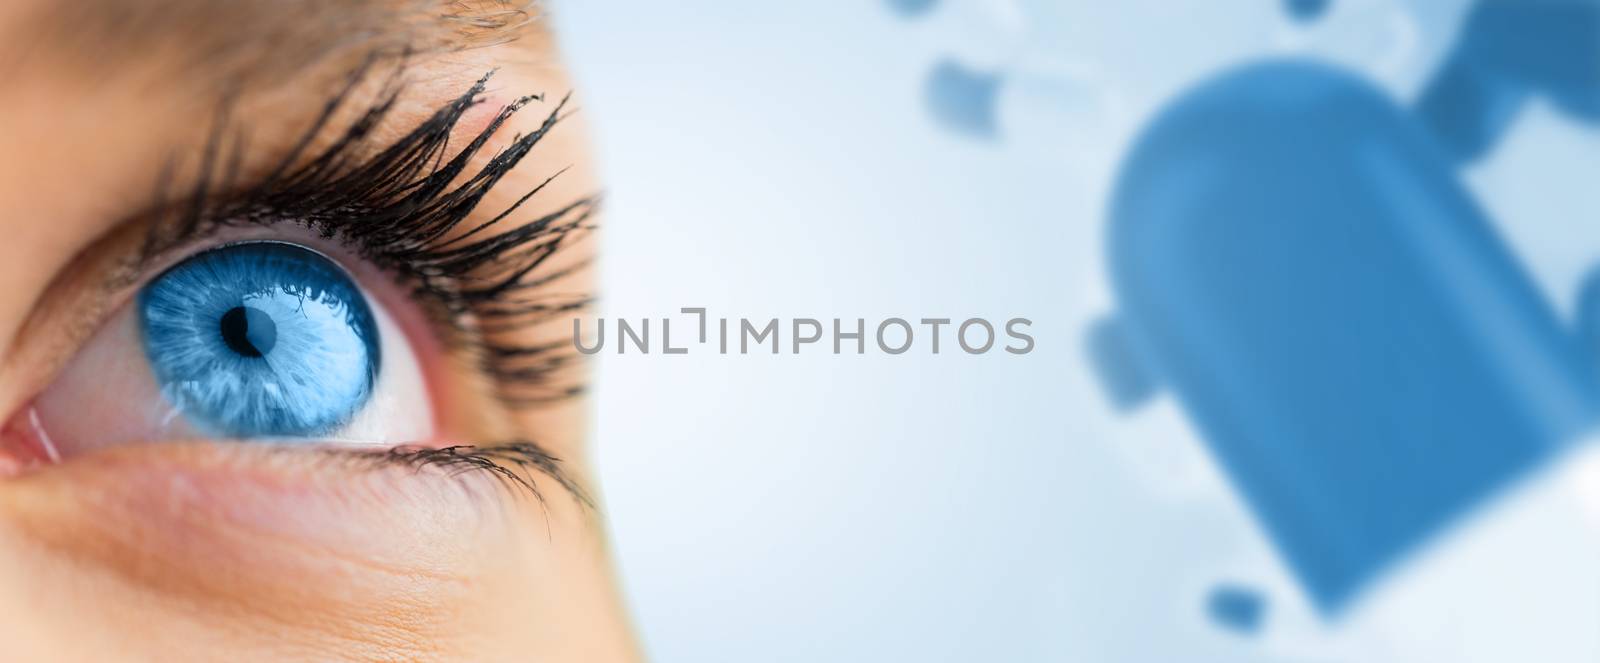 Composite image of blue eye looking up on female face by Wavebreakmedia